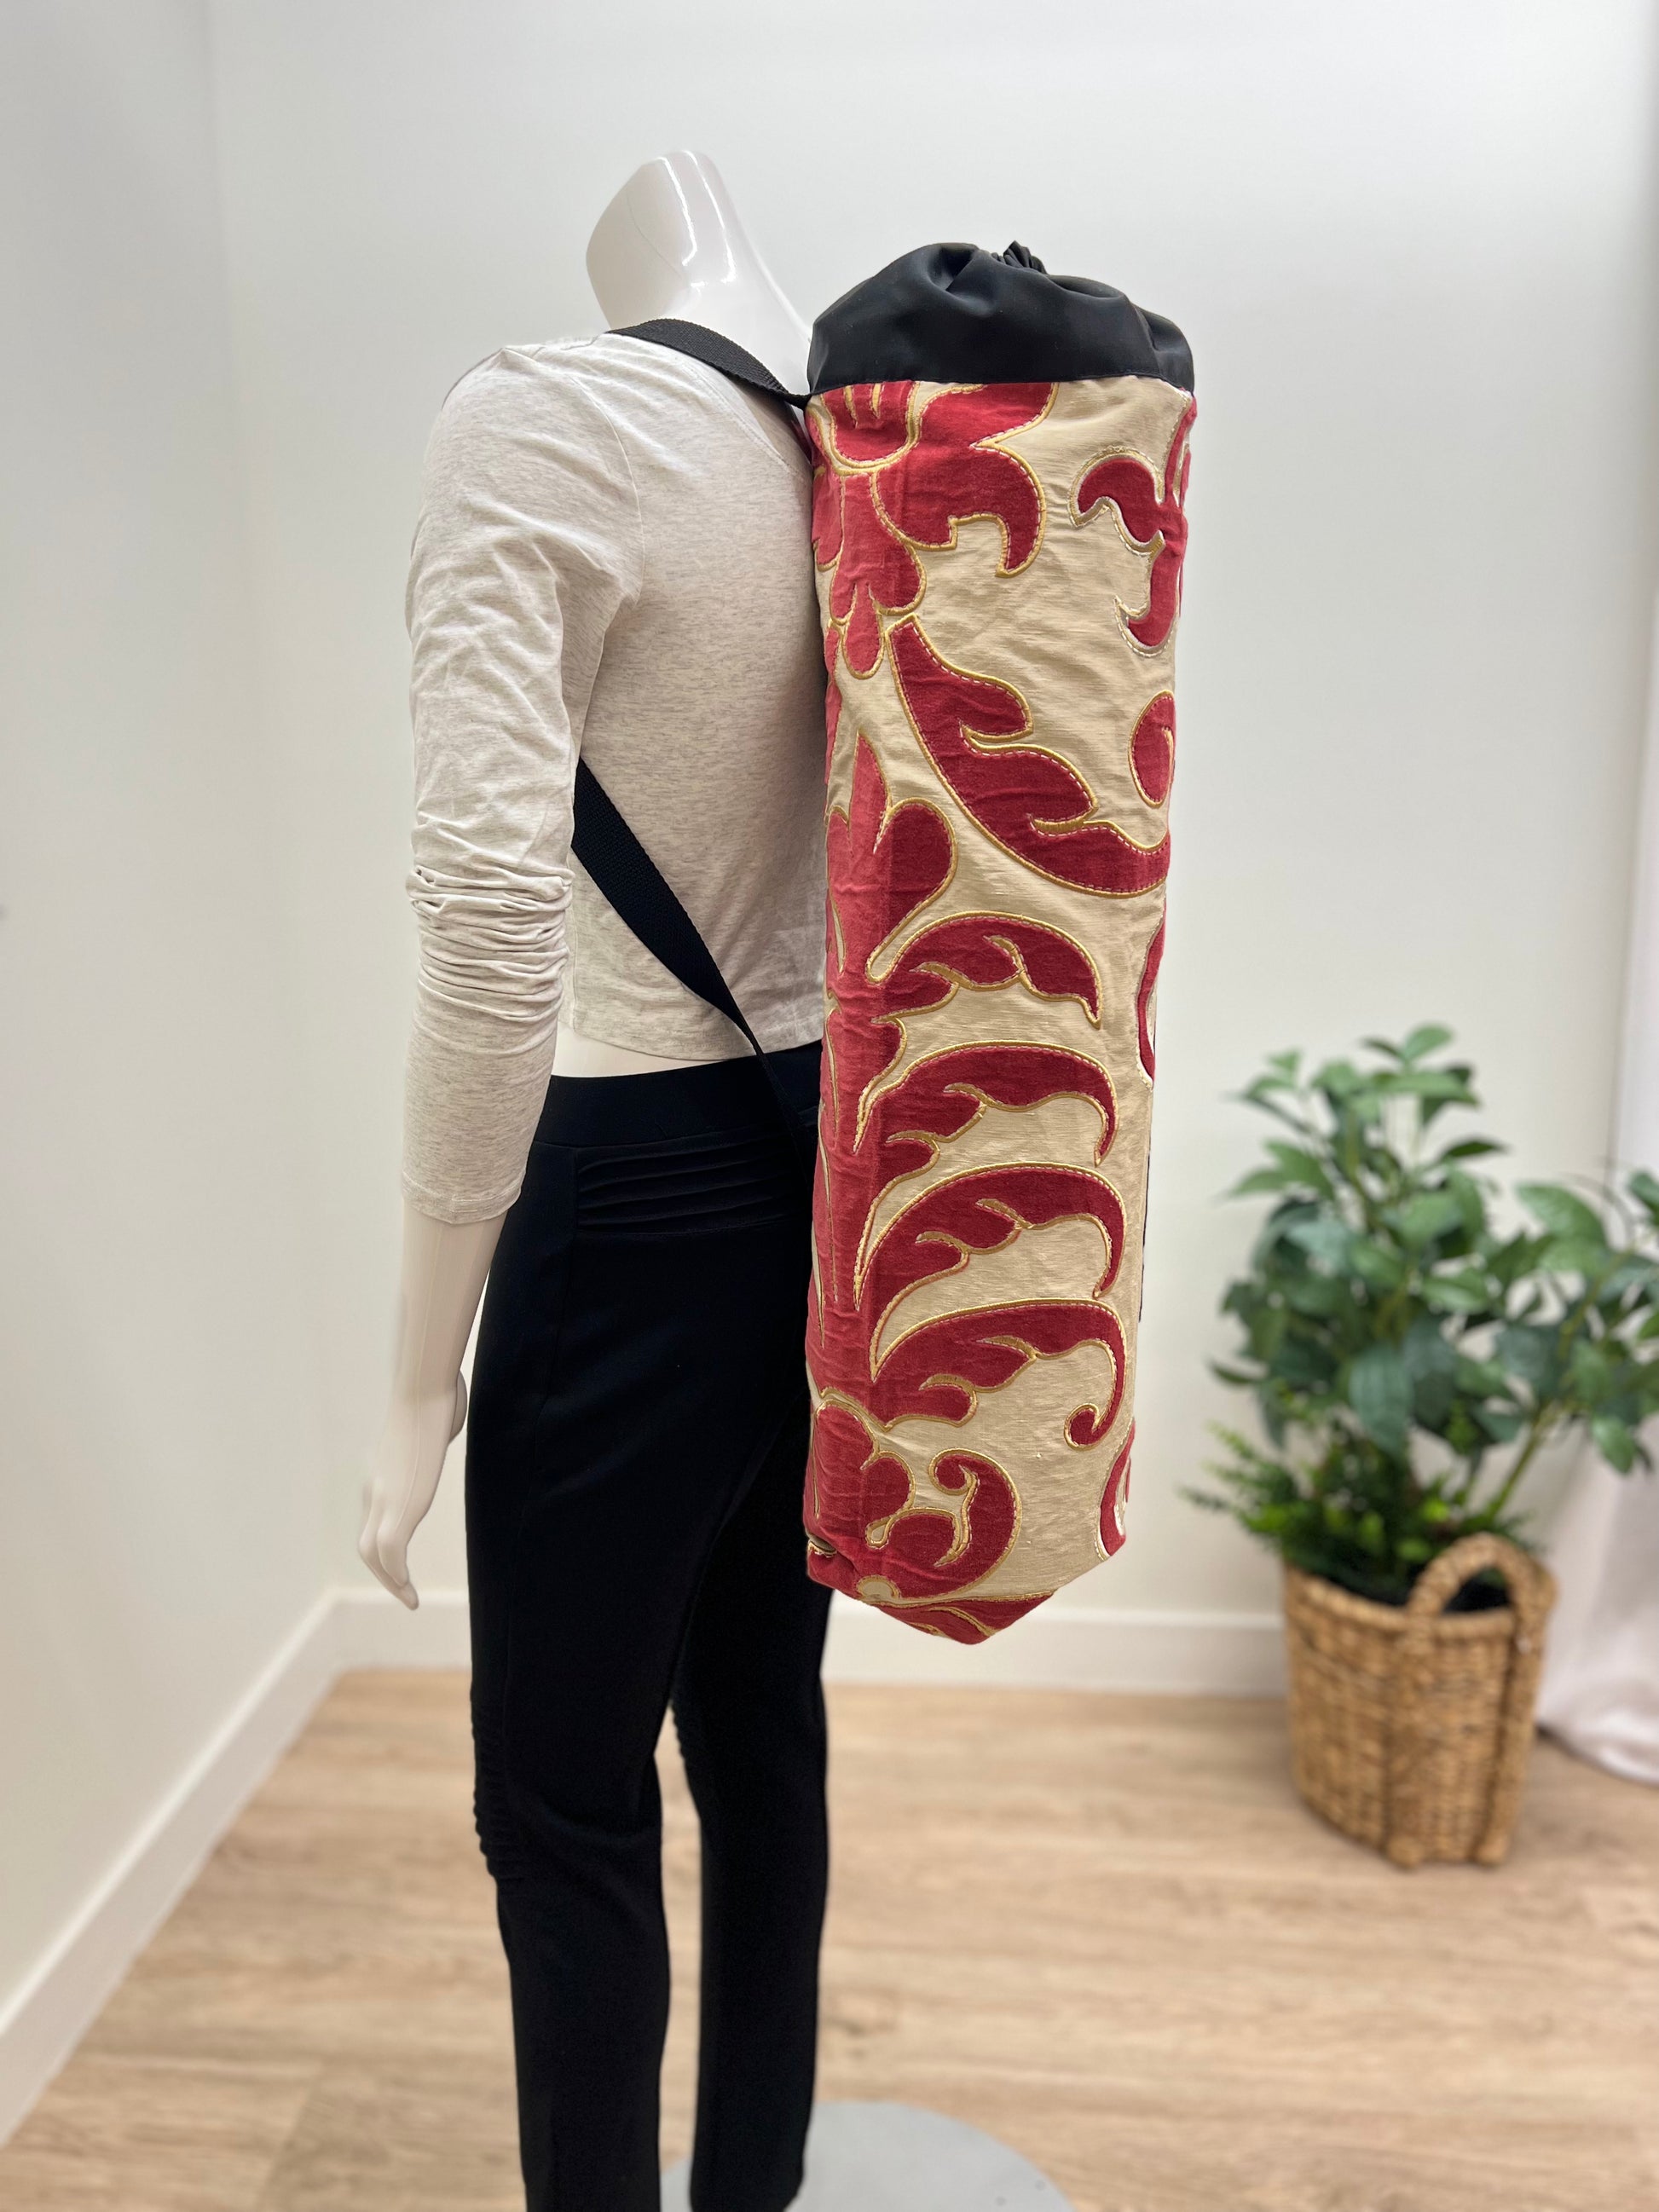 Yoga Mat Bag, Backpack Option in Red and Gold Scroll embroidery print handcrafted by My Yoga Room Elements in their Canadian Studio premium quality yoga products